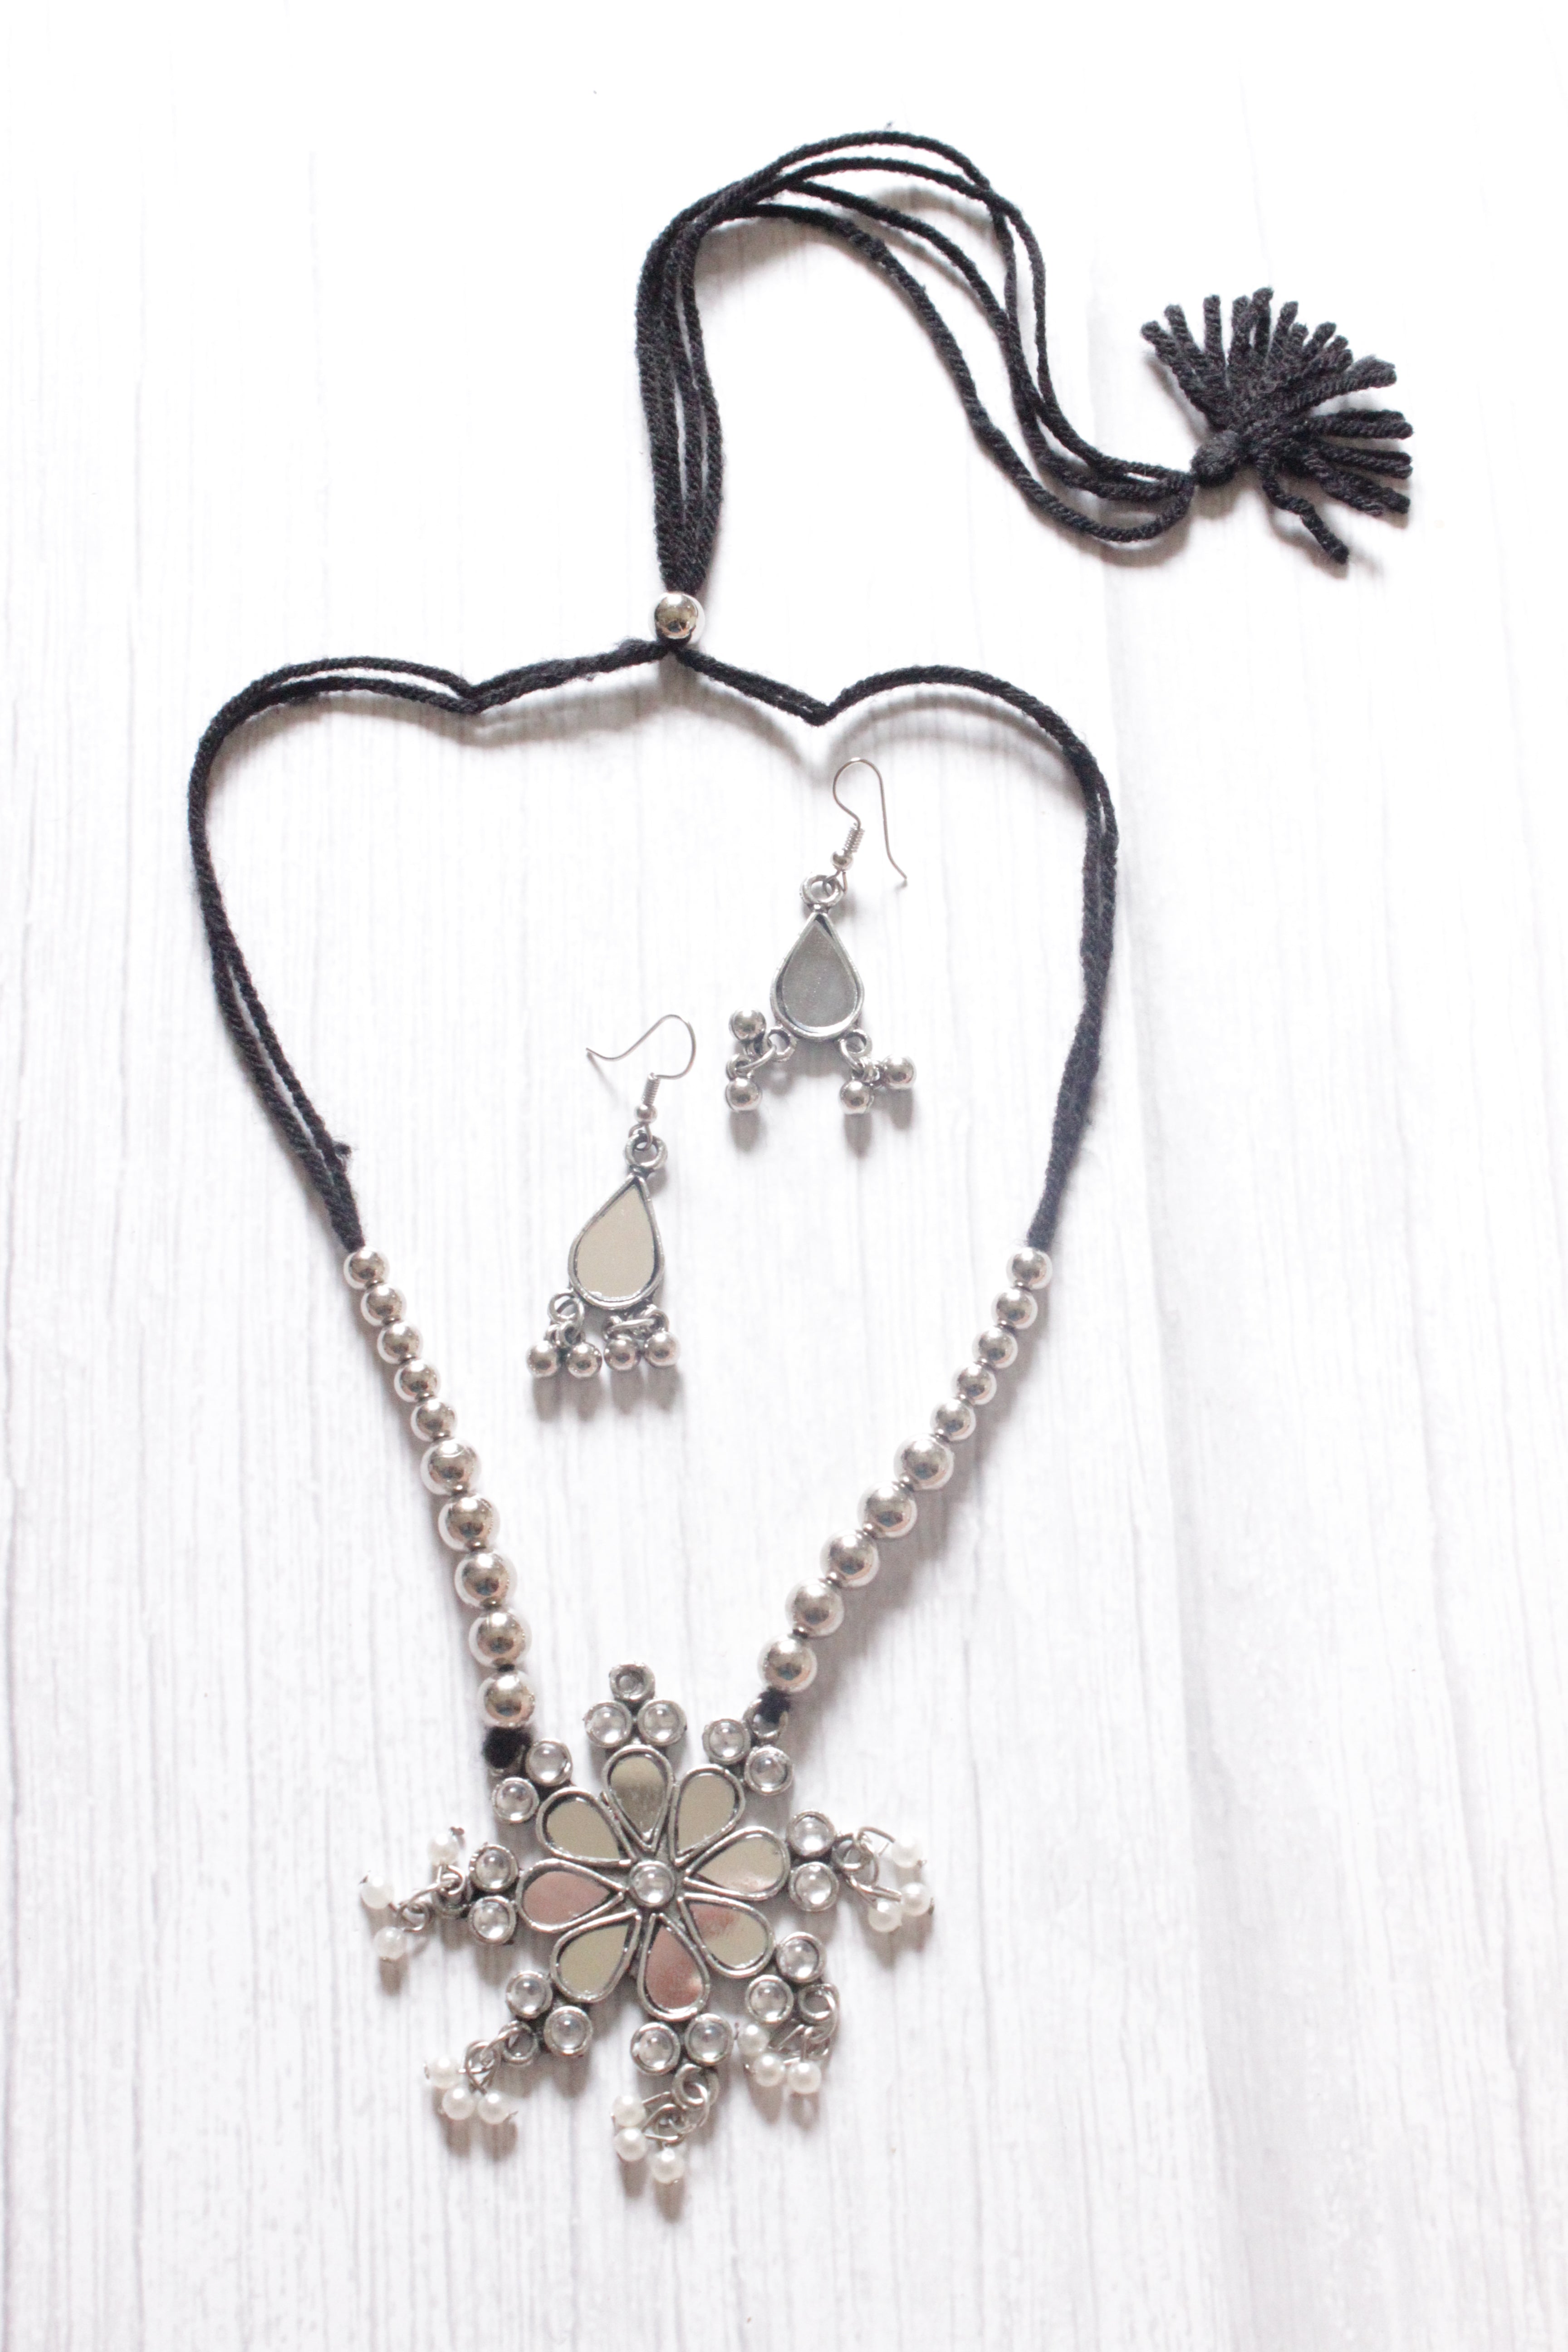 Mirror Work Pendant and Earrings Flower Motif Long Chain Silver Finish Metal Necklace Set